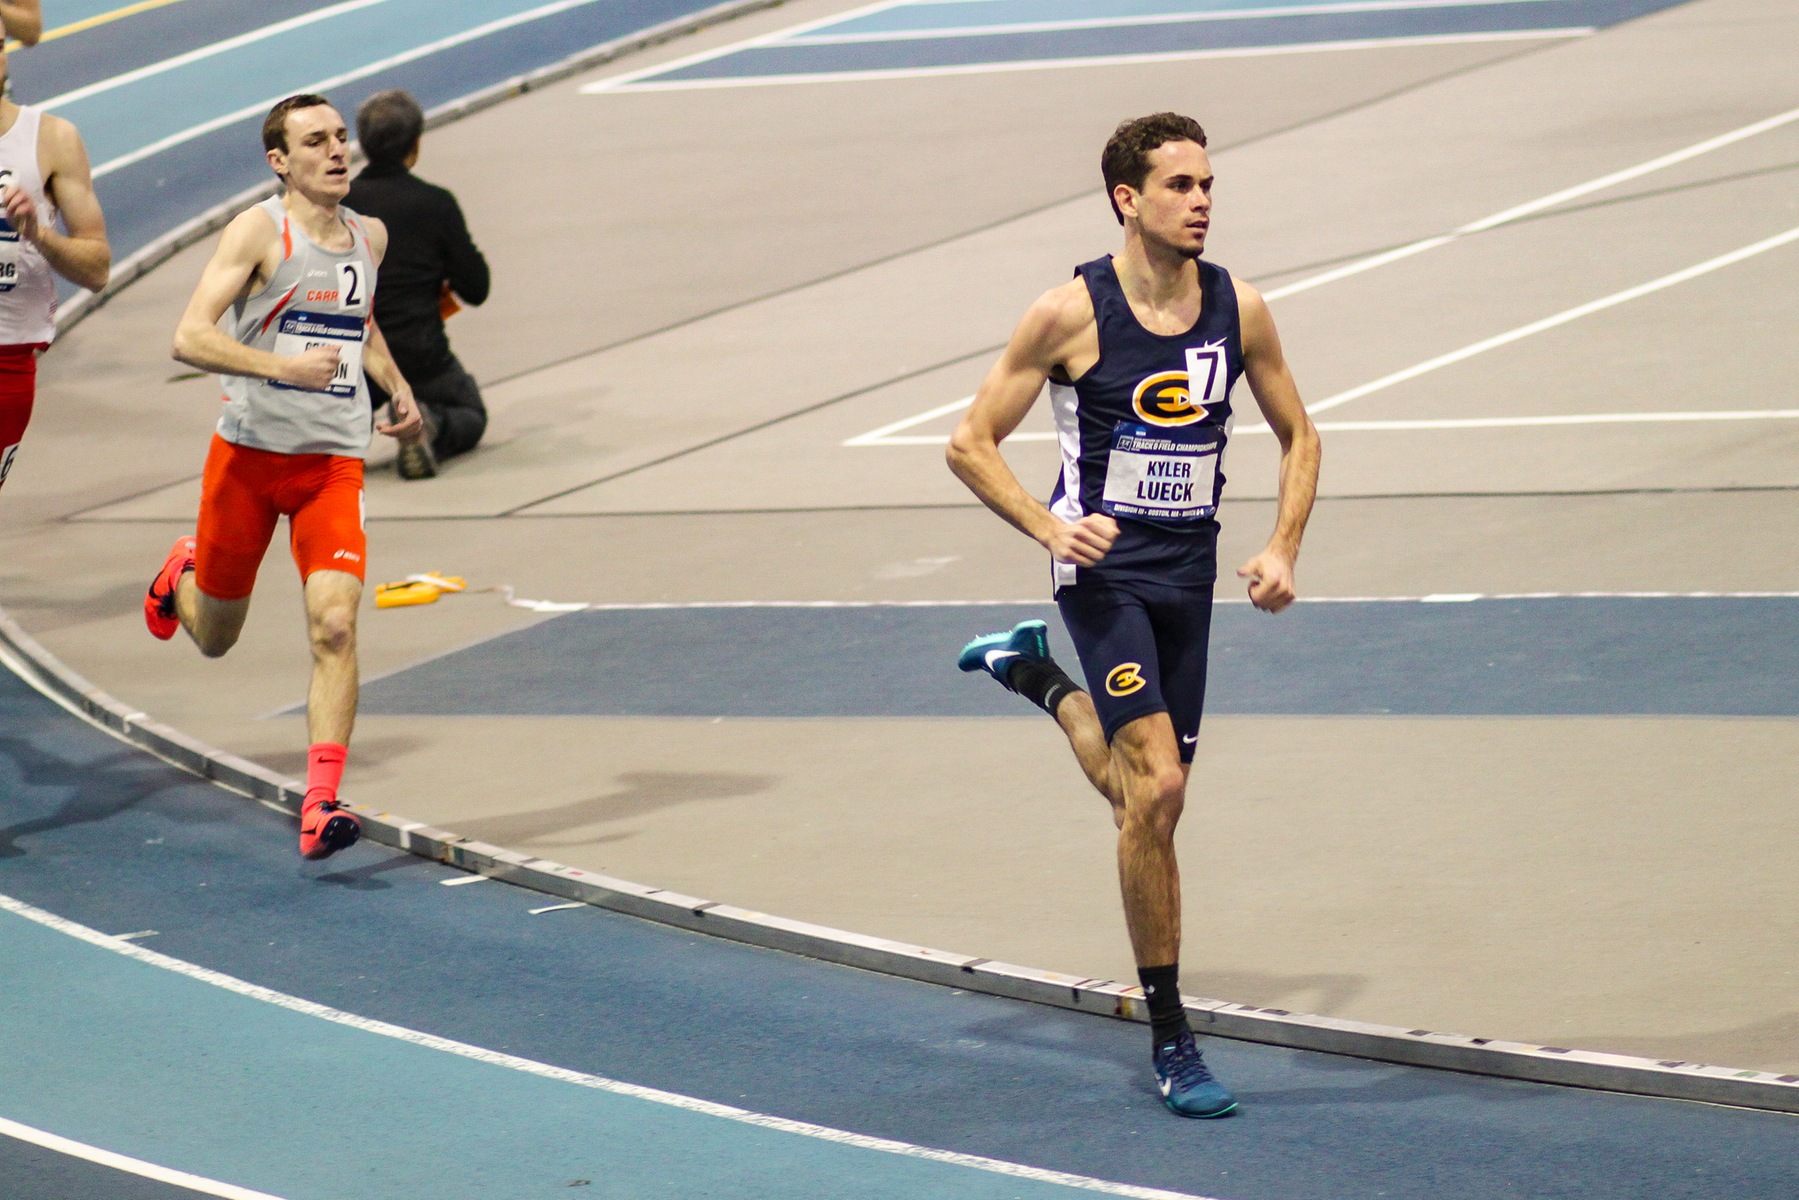 Lueck Wins 800-Meter at the Drake Relays